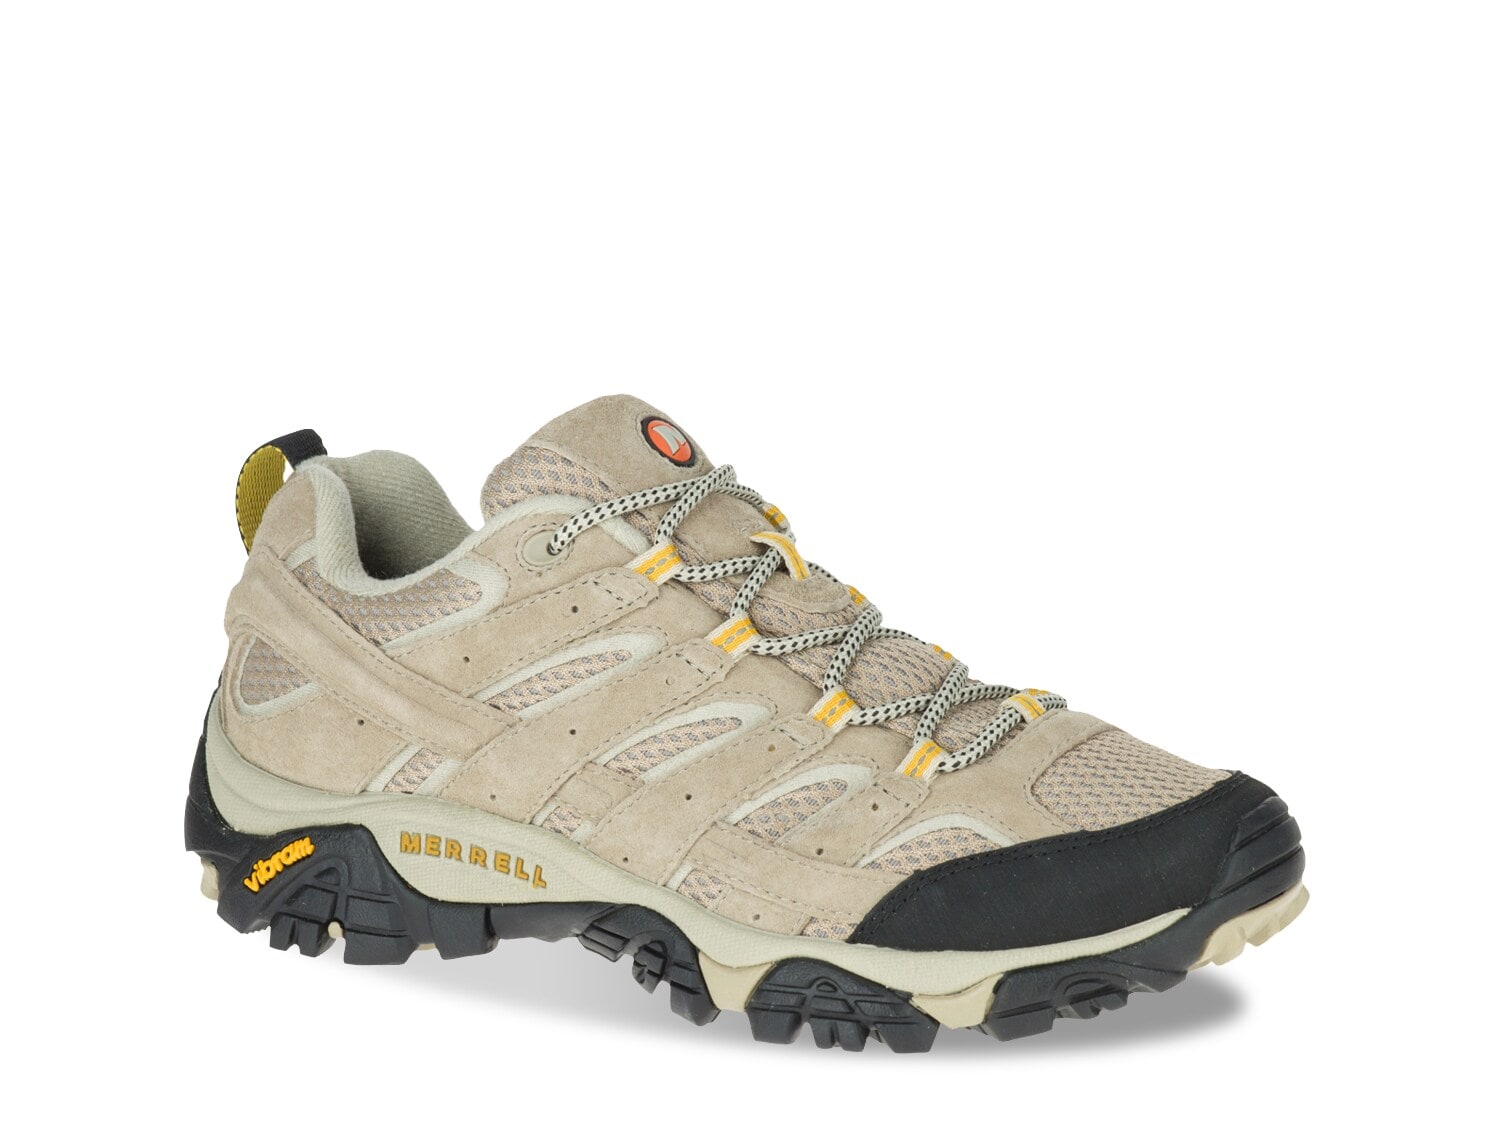 merrell womens wide shoes